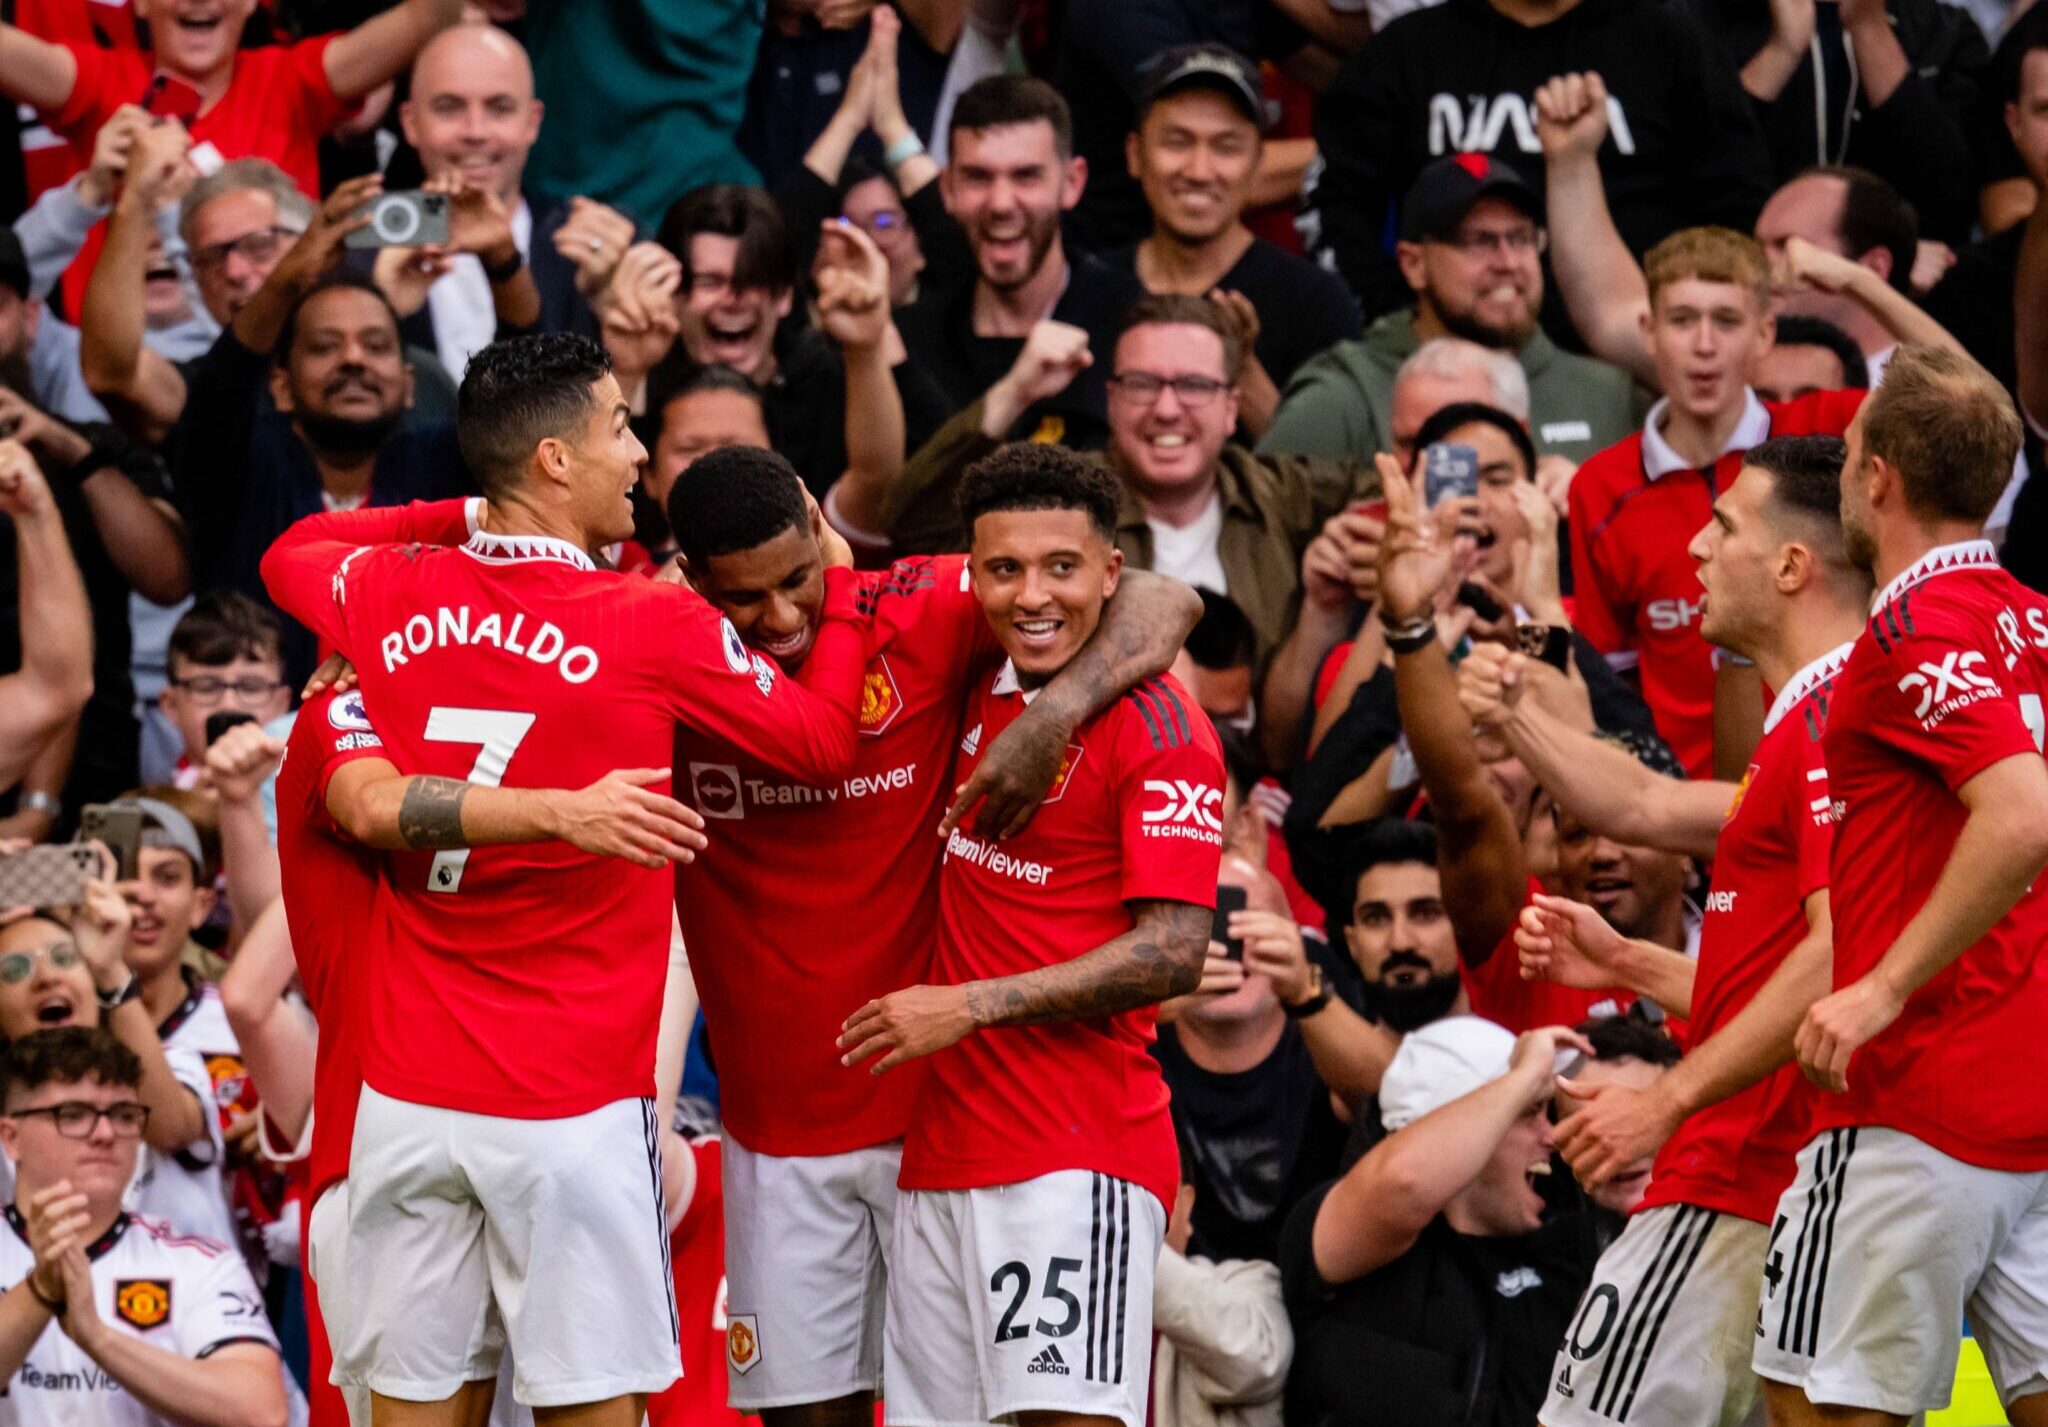 Man United players rejoice after a goal against Arsenal at Old Trafford [PHOTO: TW @ManUtd]